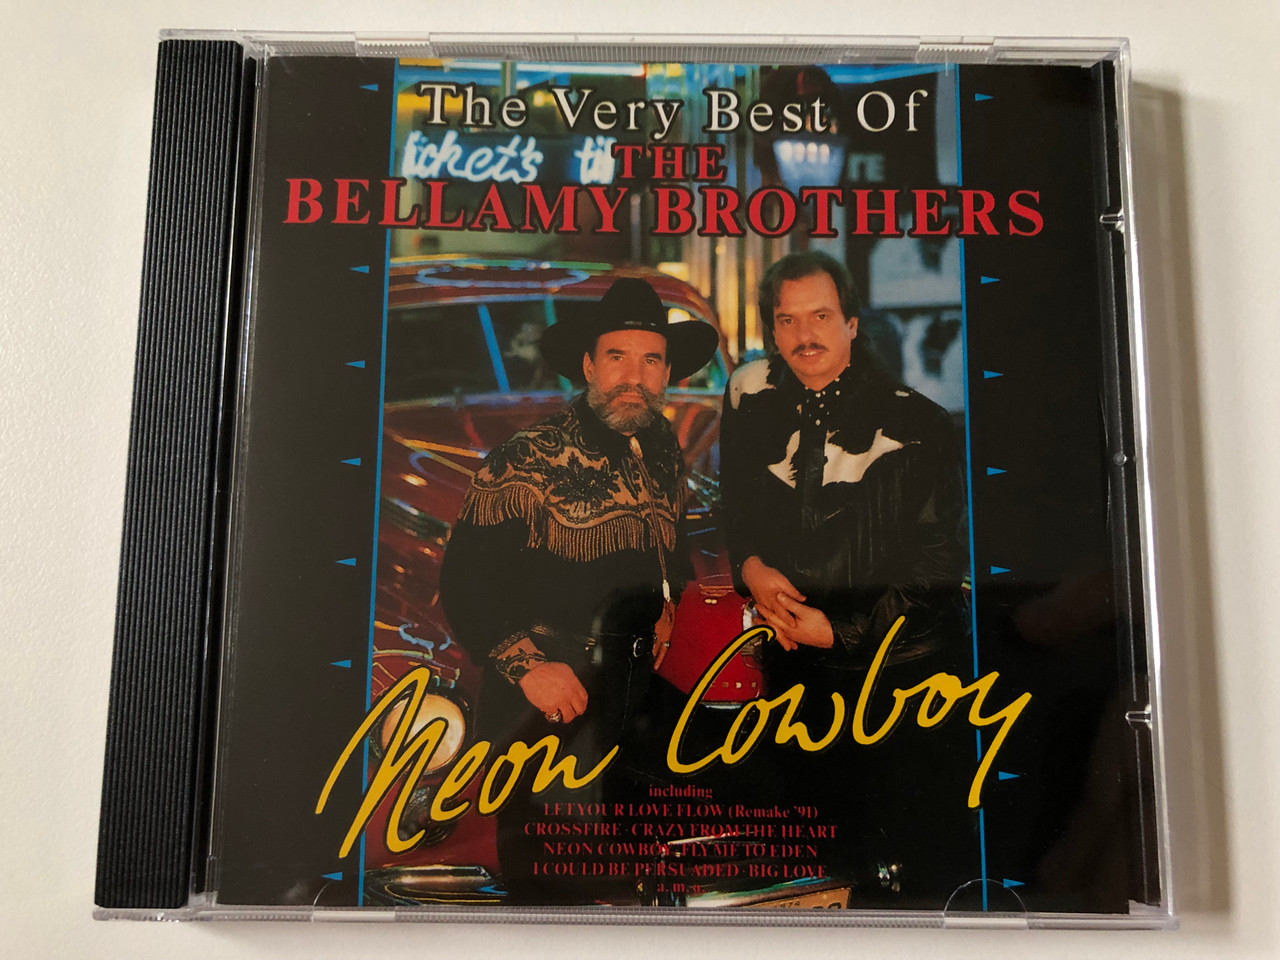 https://cdn10.bigcommerce.com/s-62bdpkt7pb/products/0/images/258010/The_Very_Best_Of_The_Bellamy_Brothers_-_Neon_Cowboy_Including_Letyour_Love_Flow_Remake_91_Crossfire_Crazy_From_The_Heart_Neon_Cowboy_Fly_Me_To_Eden_I_Could_Be_Persuaded_Big_Love_a._1__15891.1667929884.1280.1280.JPG?c=2&_gl=1*zg8e22*_ga*MjA2NTIxMjE2MC4xNTkwNTEyNTMy*_ga_WS2VZYPC6G*MTY2NzkxNzY2My42MjAuMS4xNjY3OTI5MTgzLjM0LjAuMA..